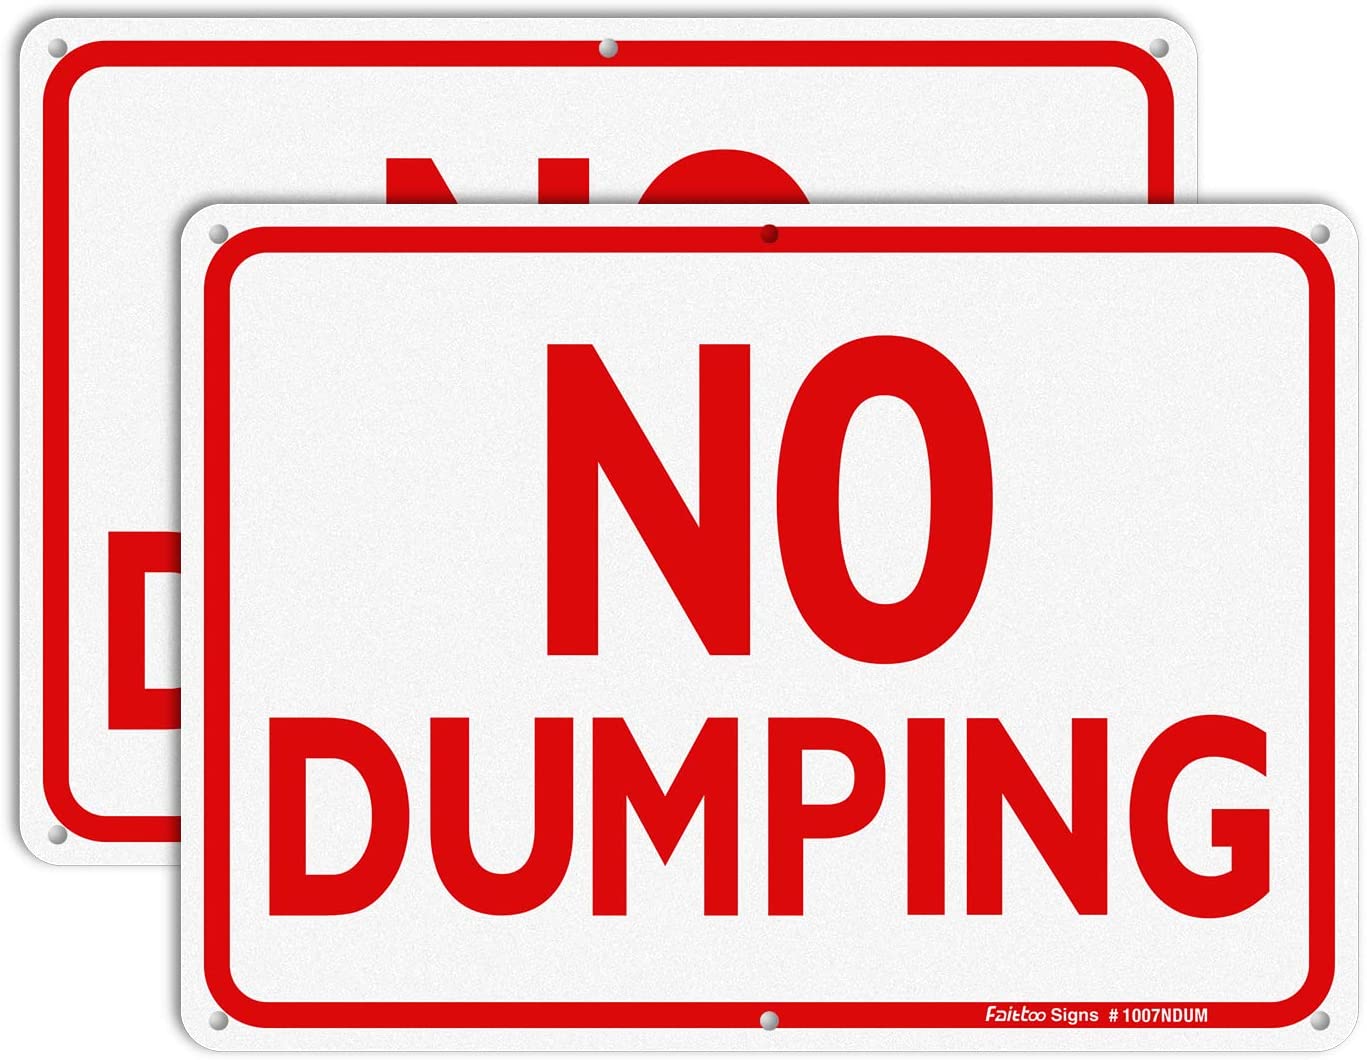 Faittoo No Dumping Sign, 2-Pack 10 x 7 Inch Reflective Rust Free Aluminum, UV Protected, Weather/Fade Resistant, Easy to Install and Read, Indoor/ Outdoors Use